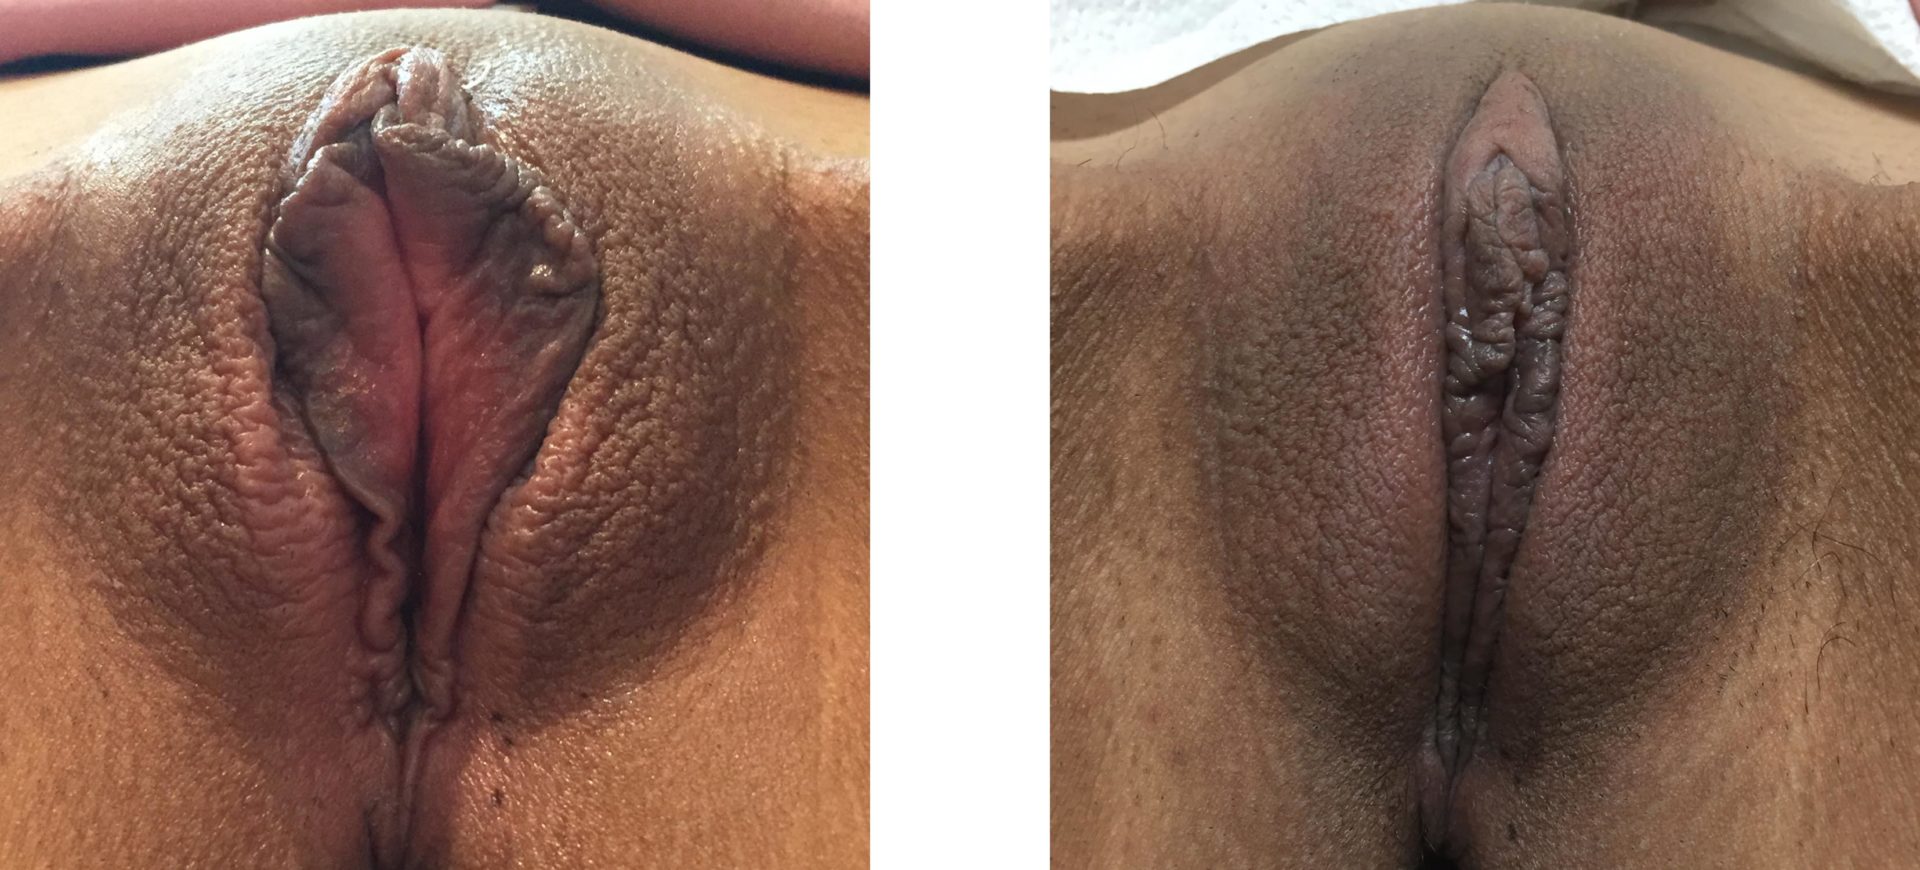 Labiaplasty Minora and Clitoral hood reduction.